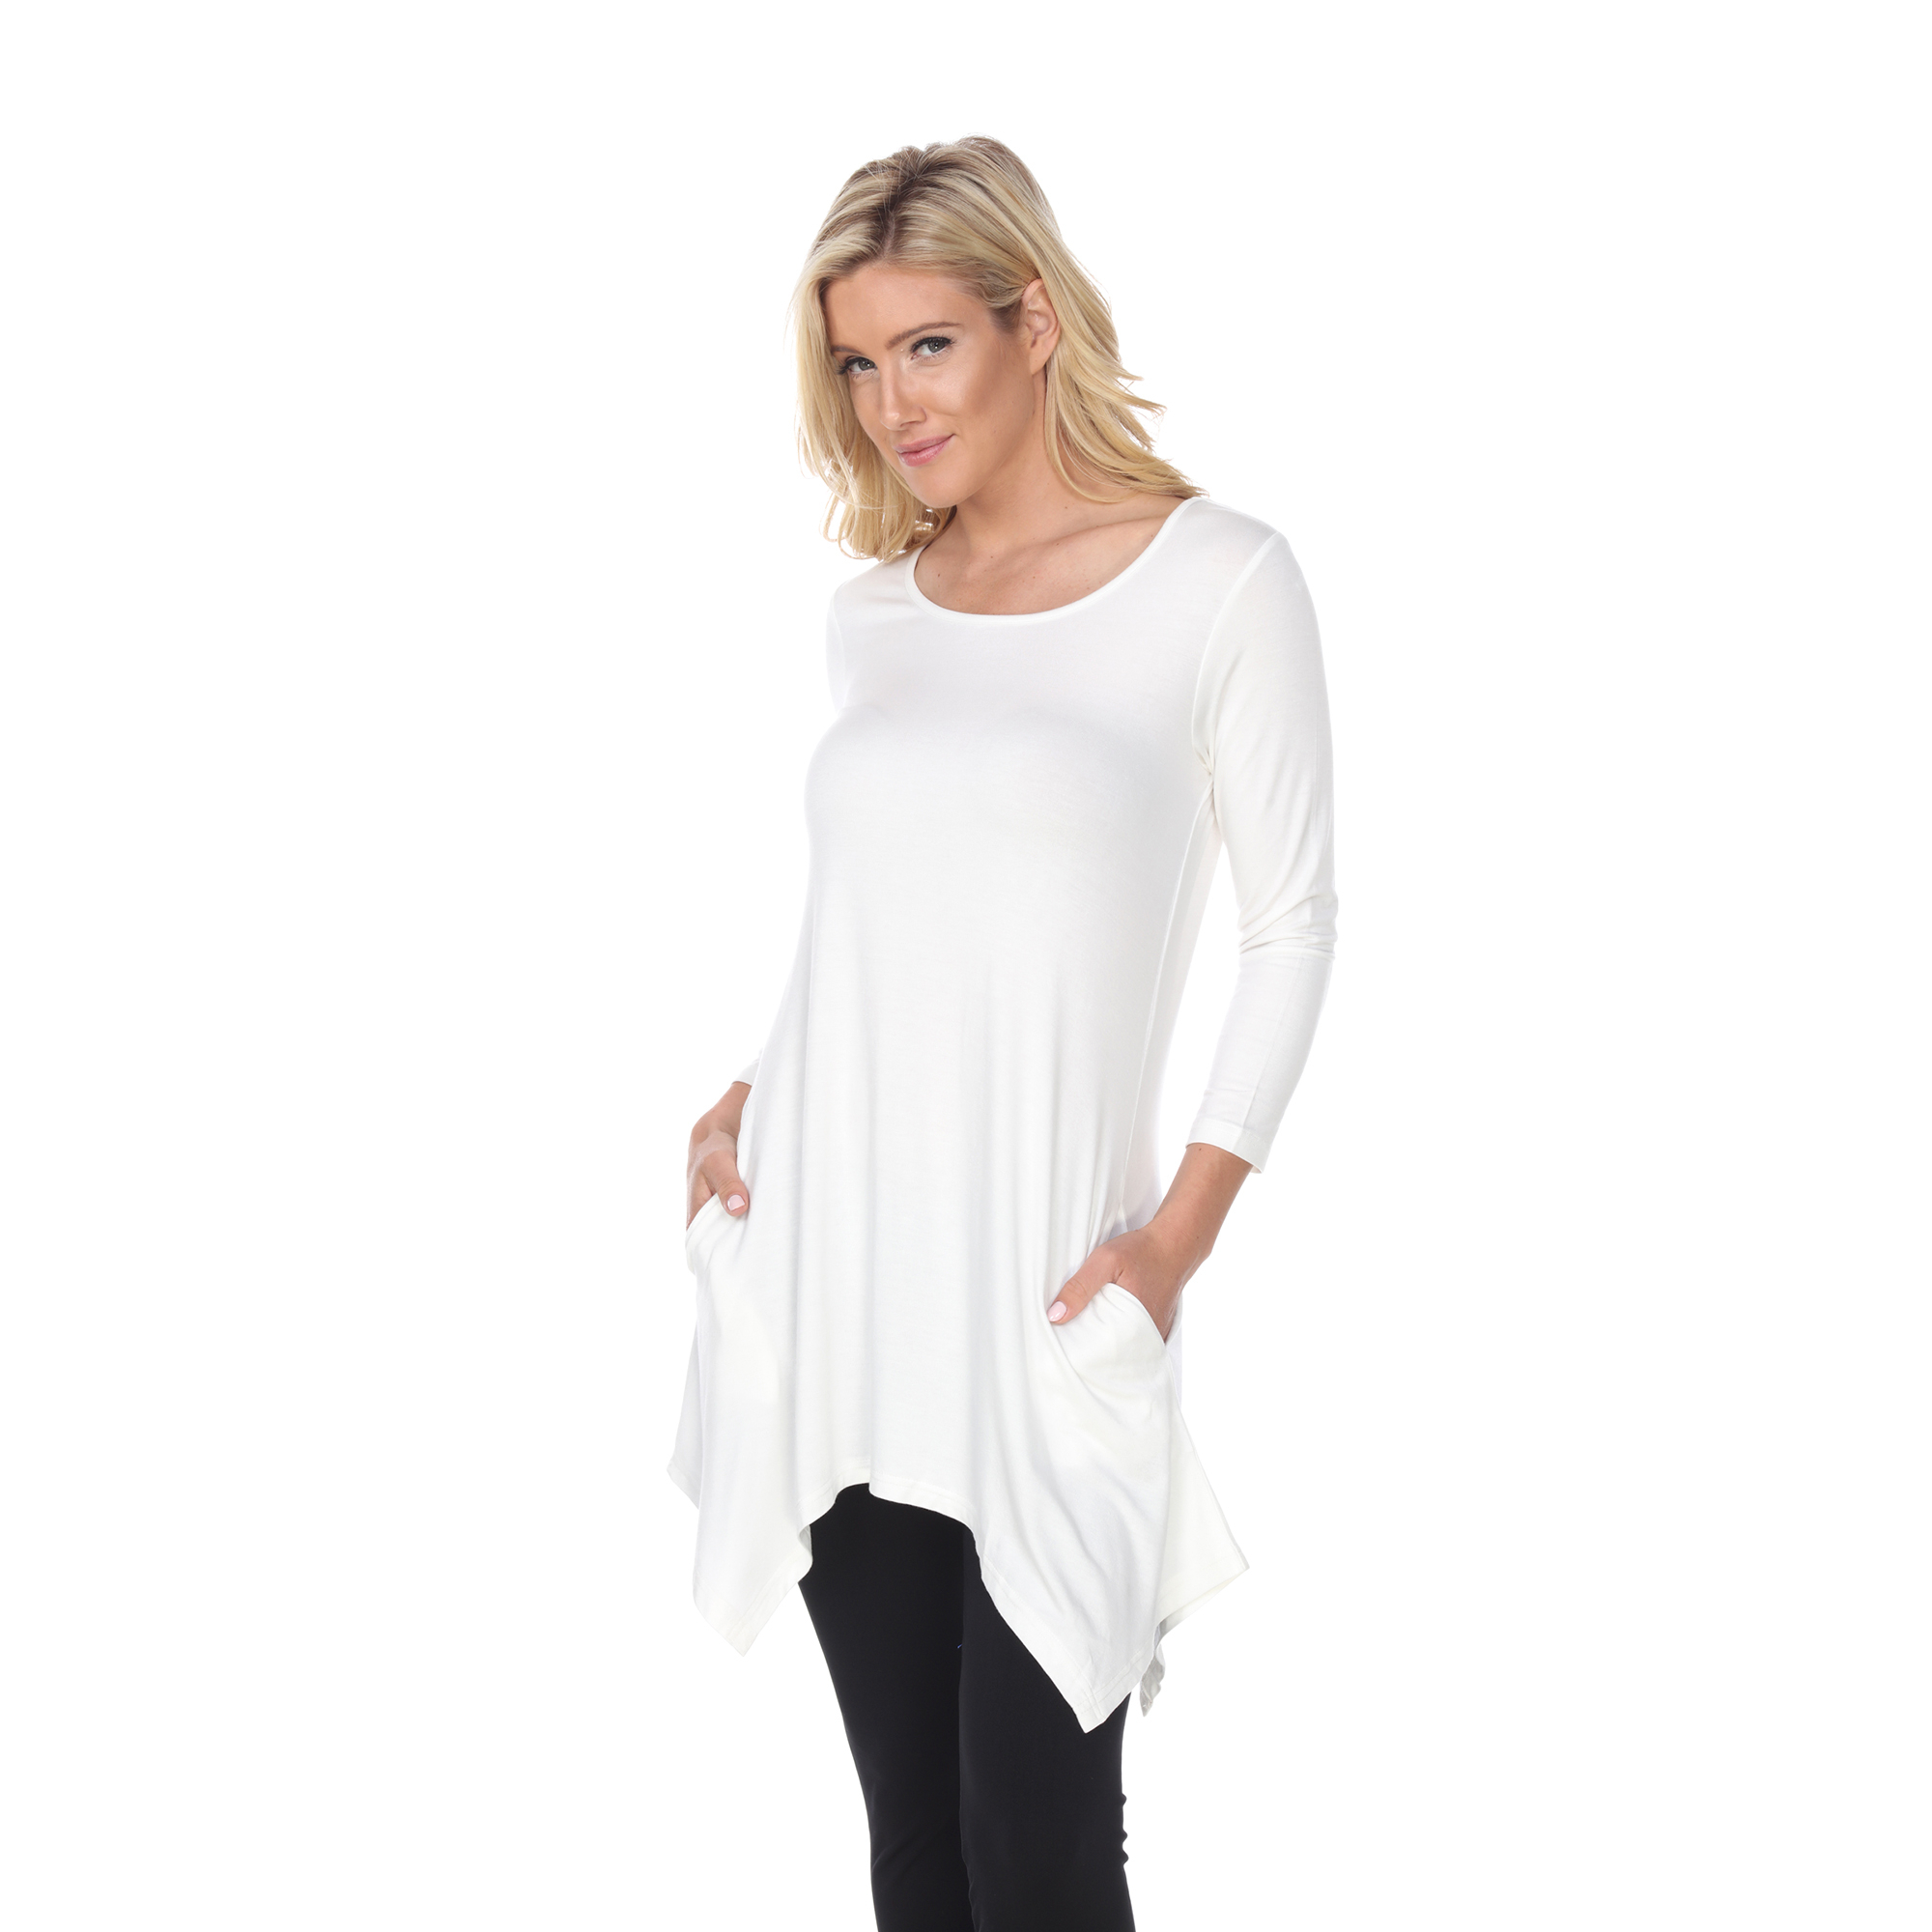 White Mark Women's Quarter Sleeve Tunic Top With Pockets - White, X-Large